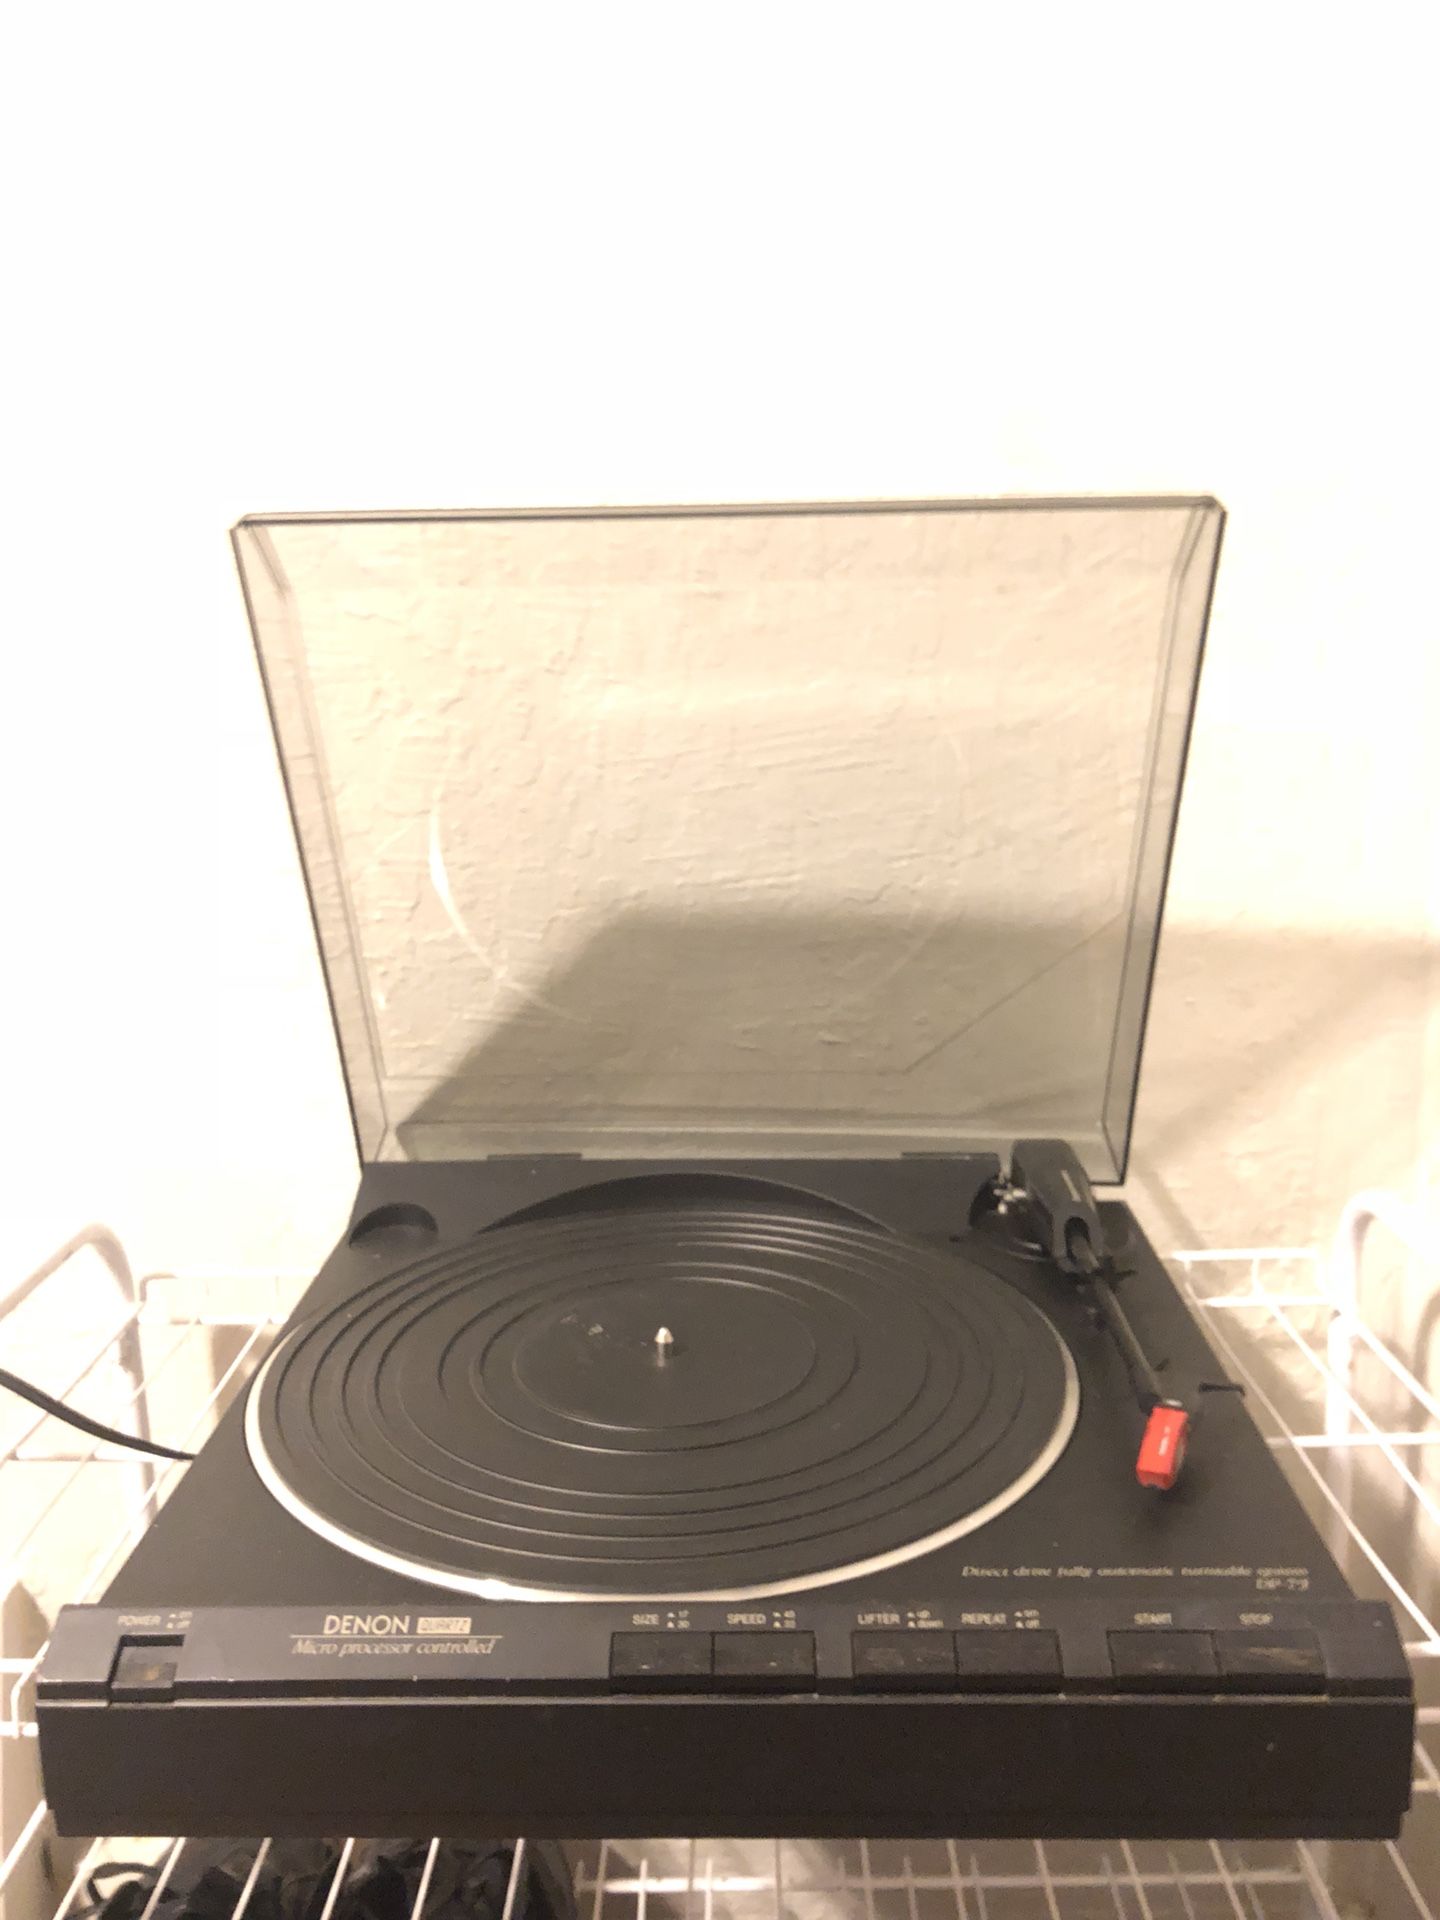 Vintage Denton DP-7F Turntable & Pyle Pro PP444 Ultra-Compact Phono Pre Amplifier (TESTED & CLEANED)